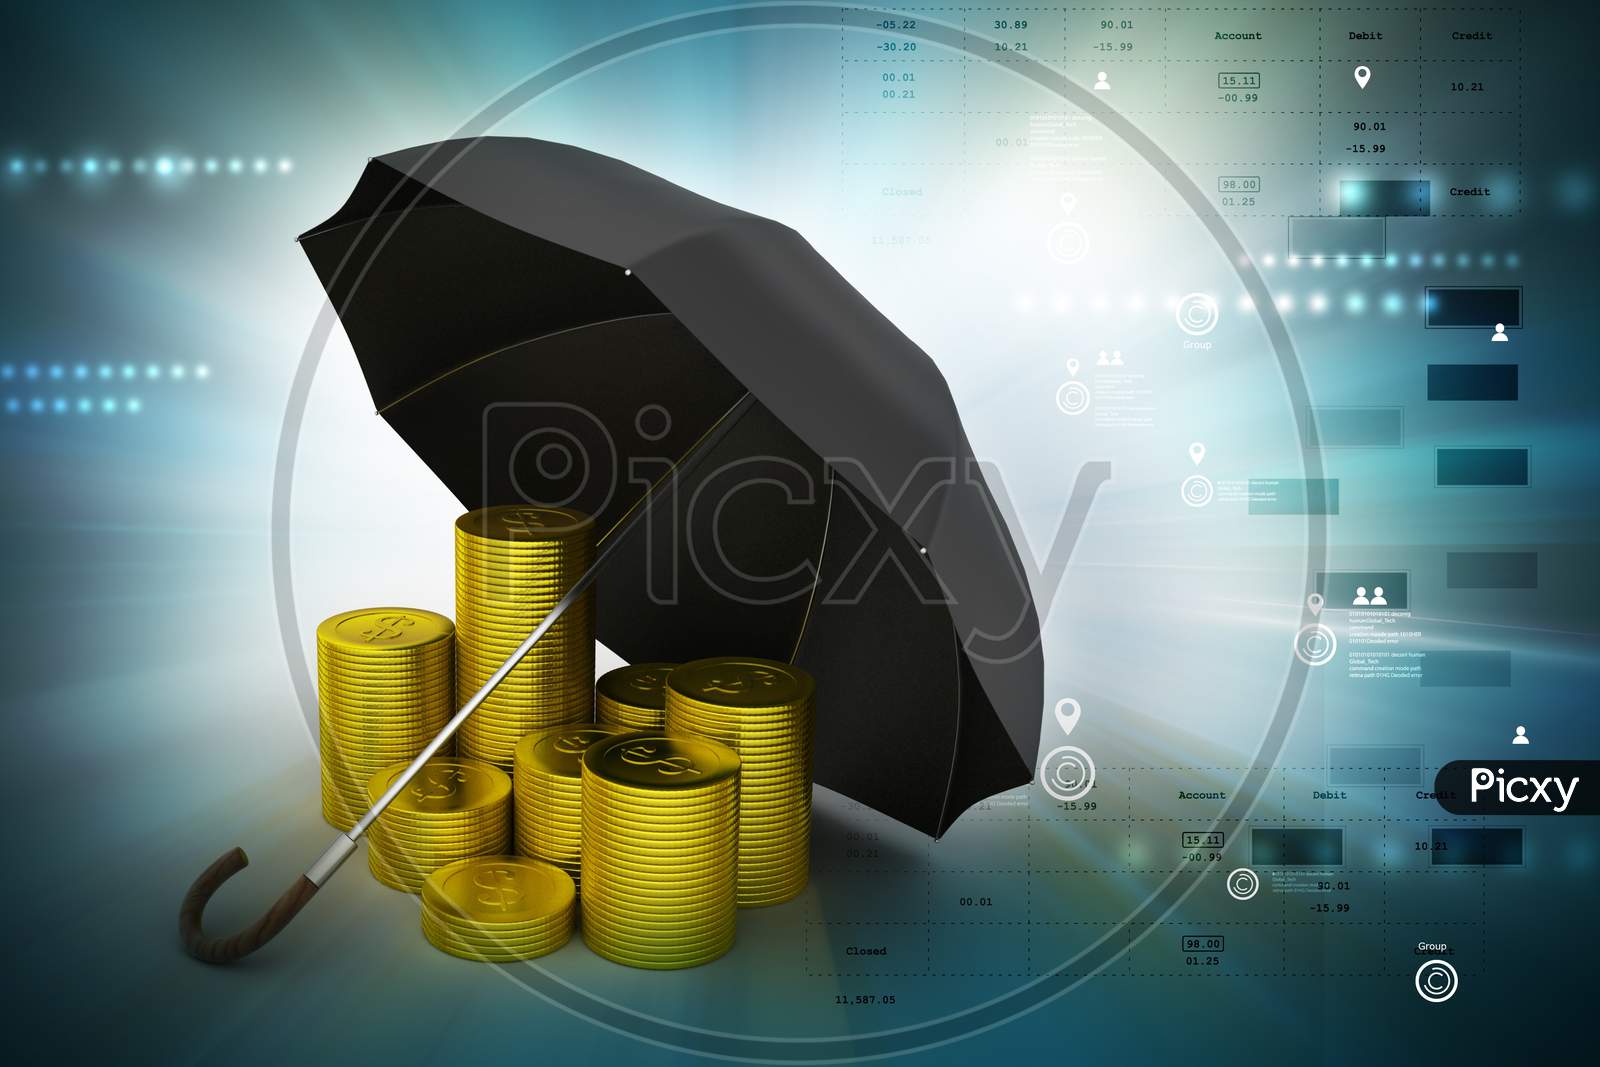 Gold coin with umbrella in color background